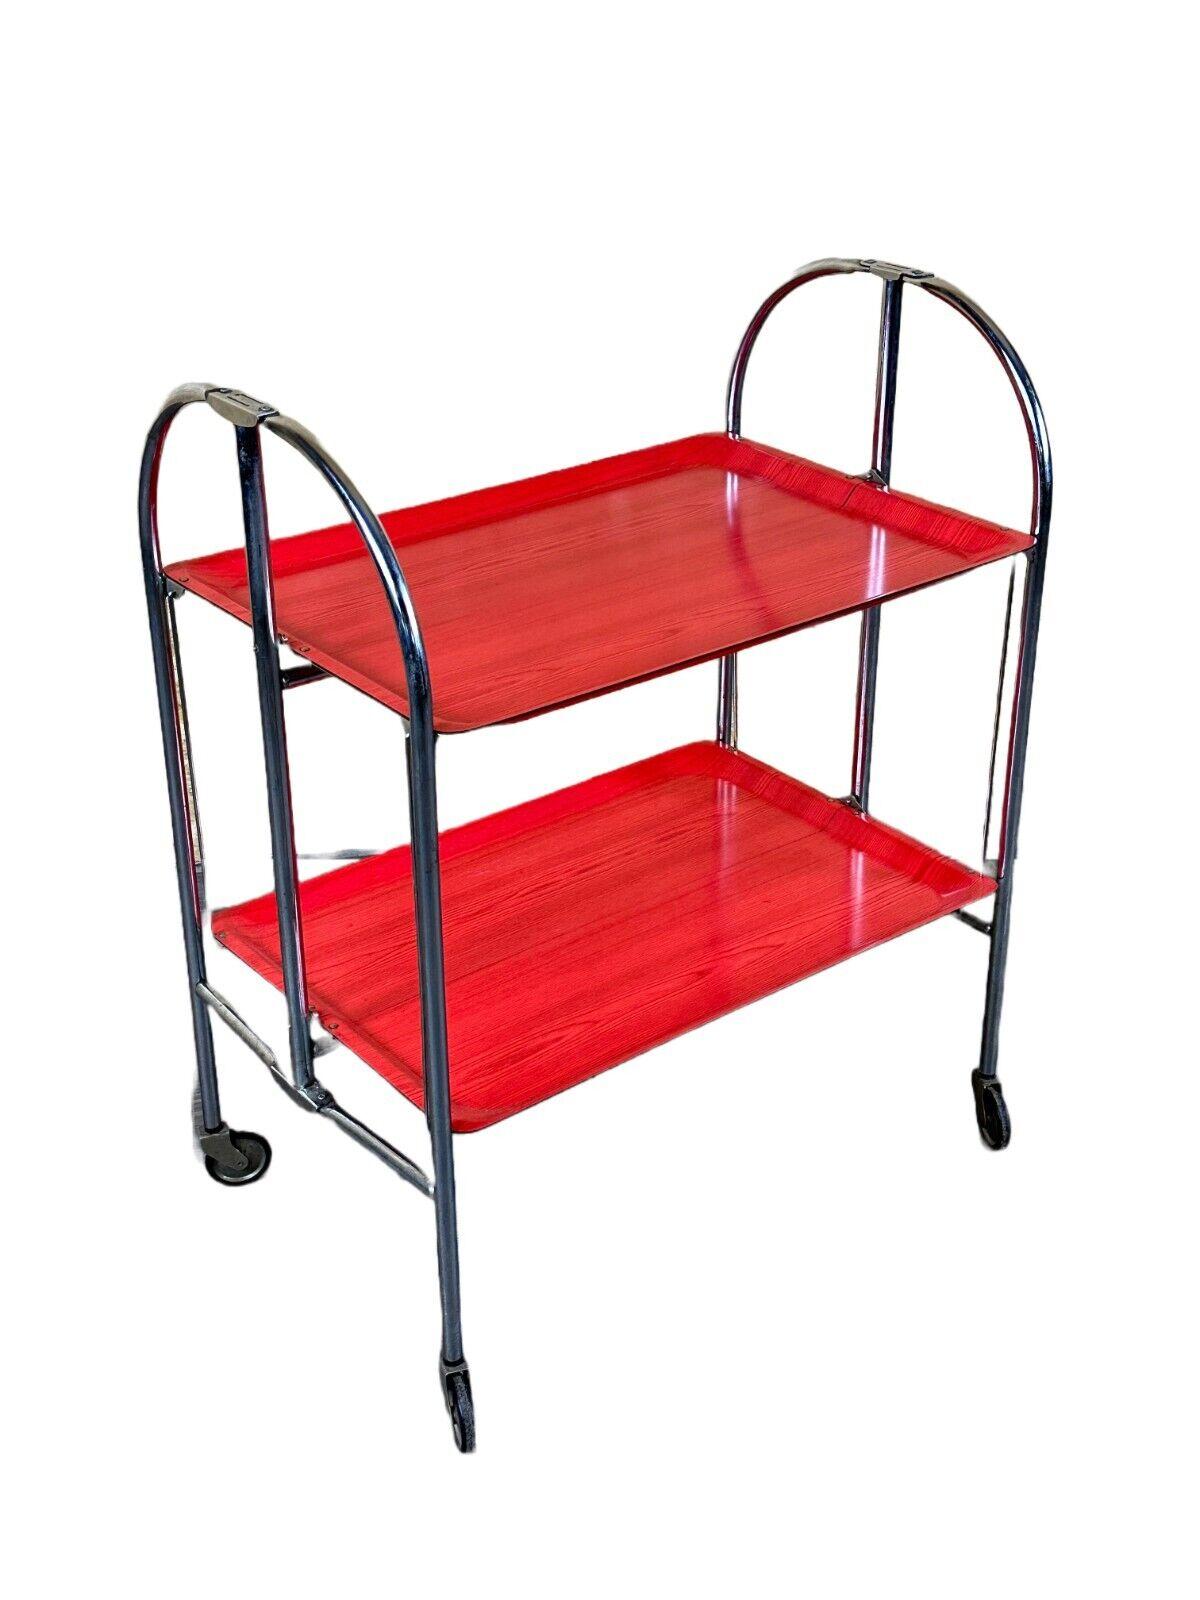 60s 70s serving trolley dinette side table space age red design

Object: serving trolley

Manufacturer:

Condition: good - vintage

Age: around 1960-1970

Dimensions:

Width = 65.5cm
Depth = 41cm
Height = 80cm

Material: metal, plastic

Other